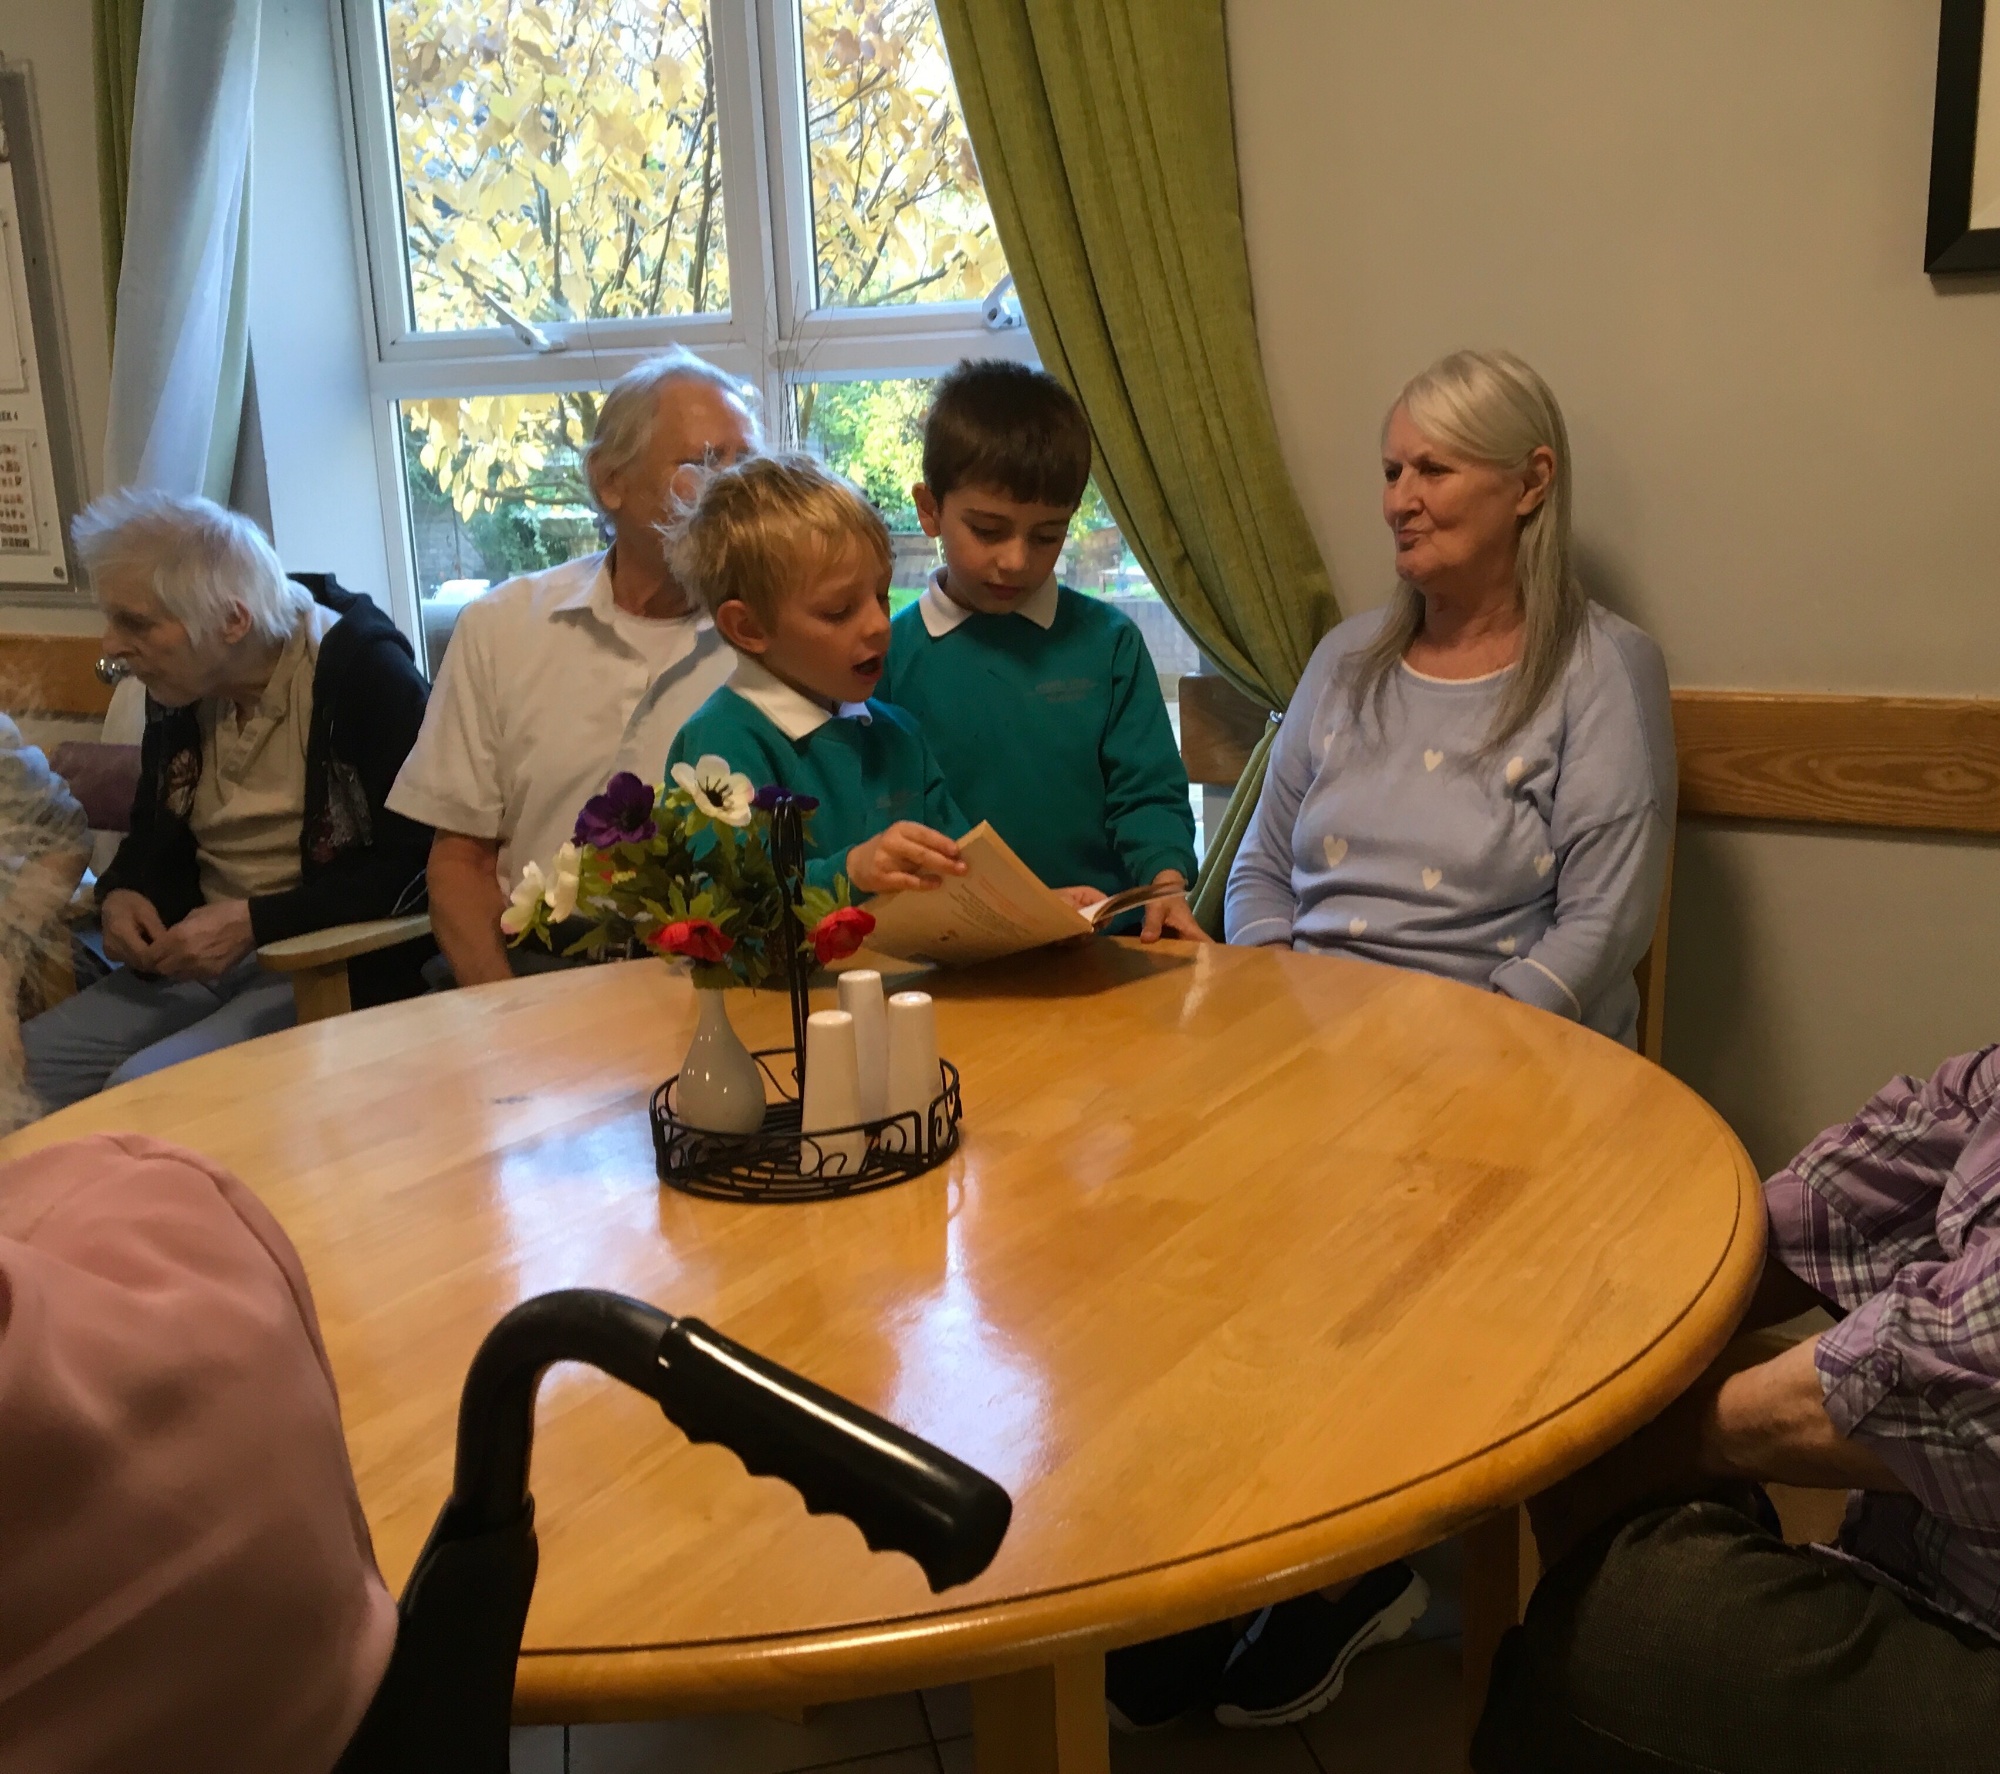 Year 2 at the Care Home